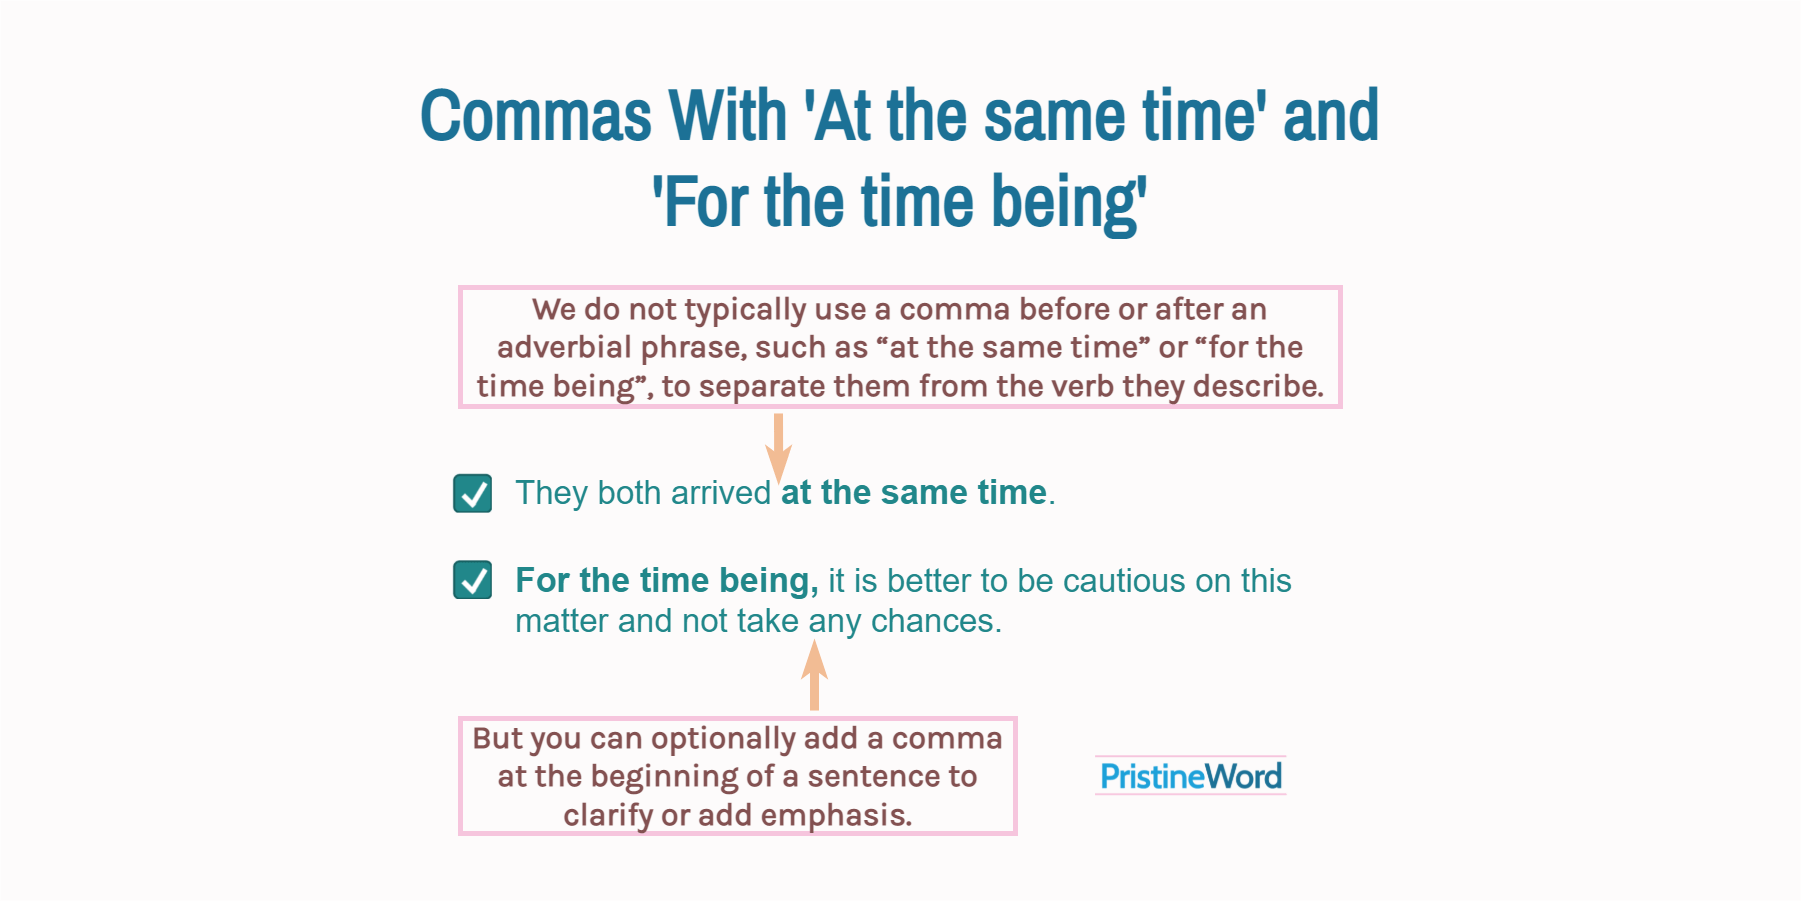 Commas With the Expressions ‘At the same time’ and ‘For the time being’